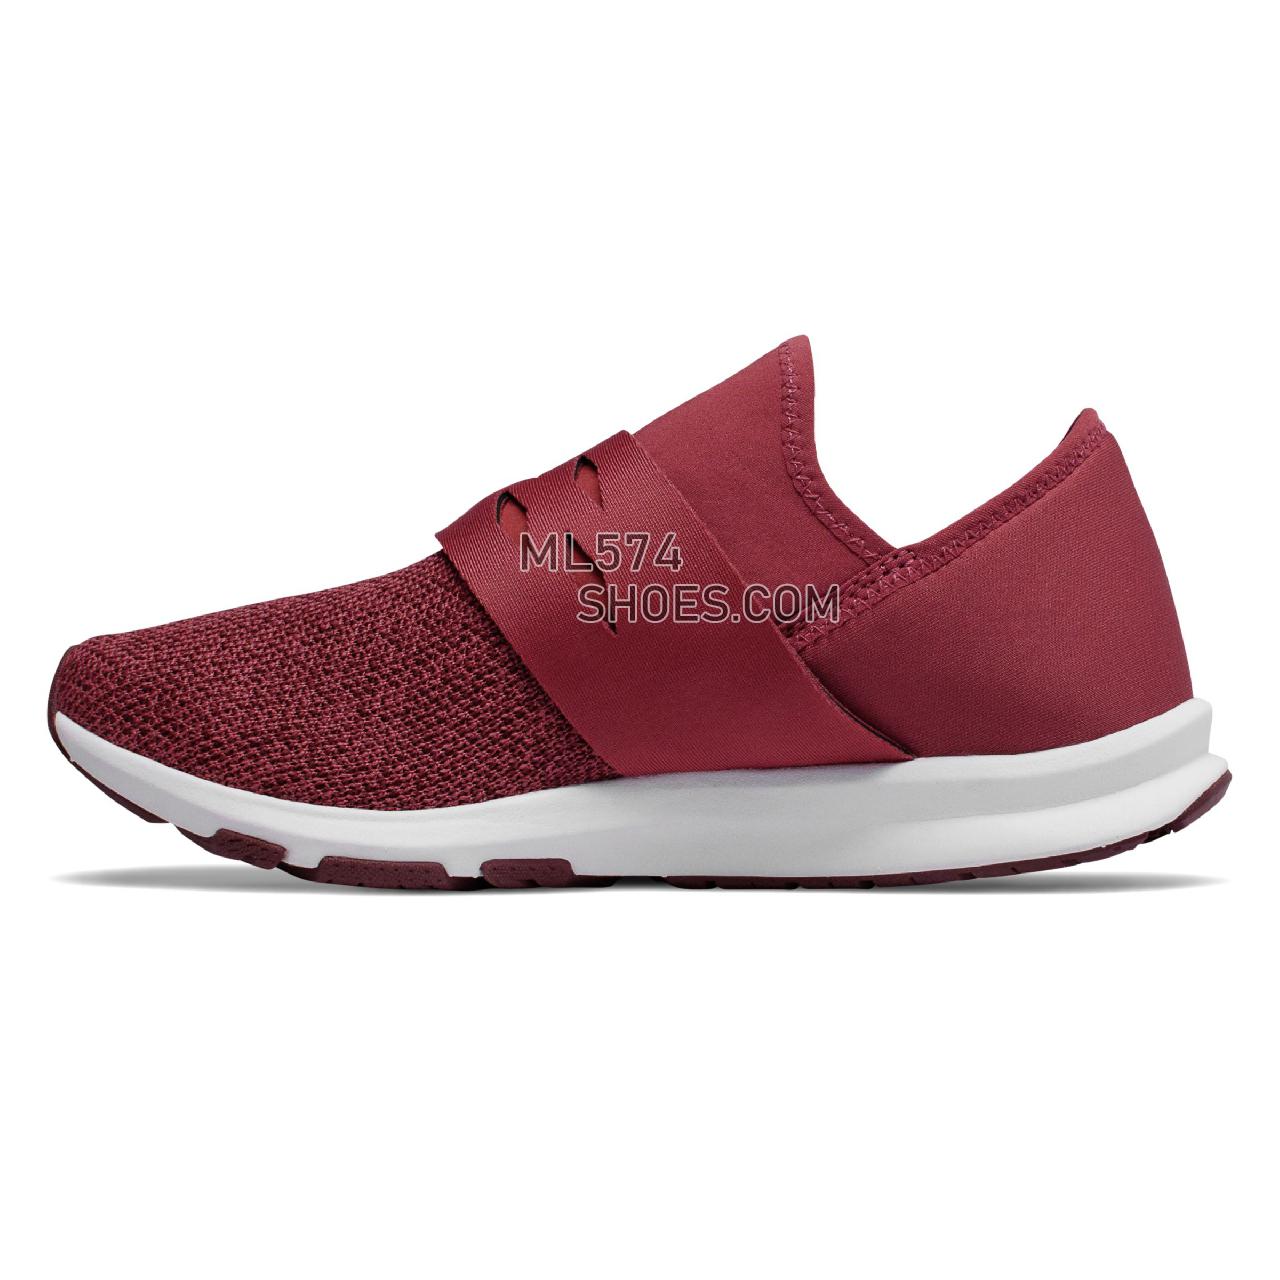 New Balance FuelCore Spark - Women's  - X-training Earth Red with Burgundy - WXSPKRH